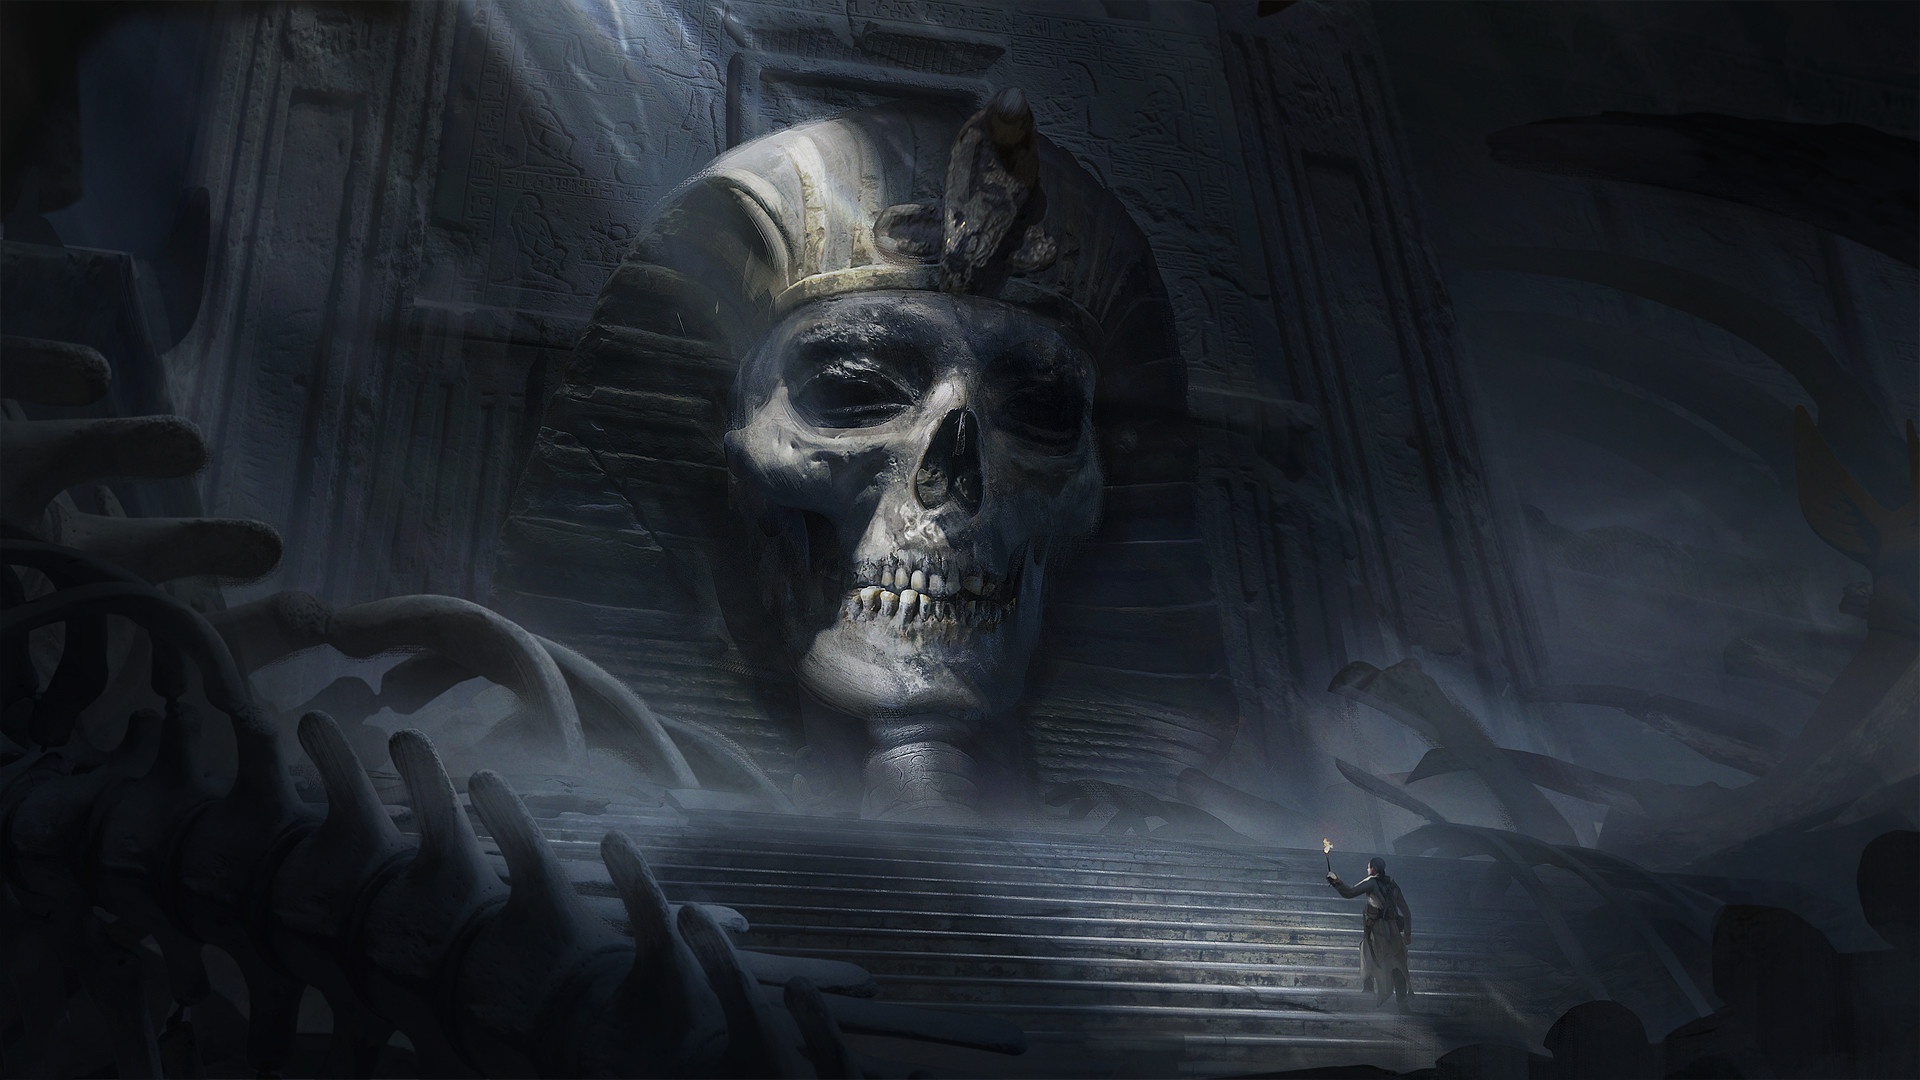 Exploring an Egyptian Ruin by Alisher Mirzoev